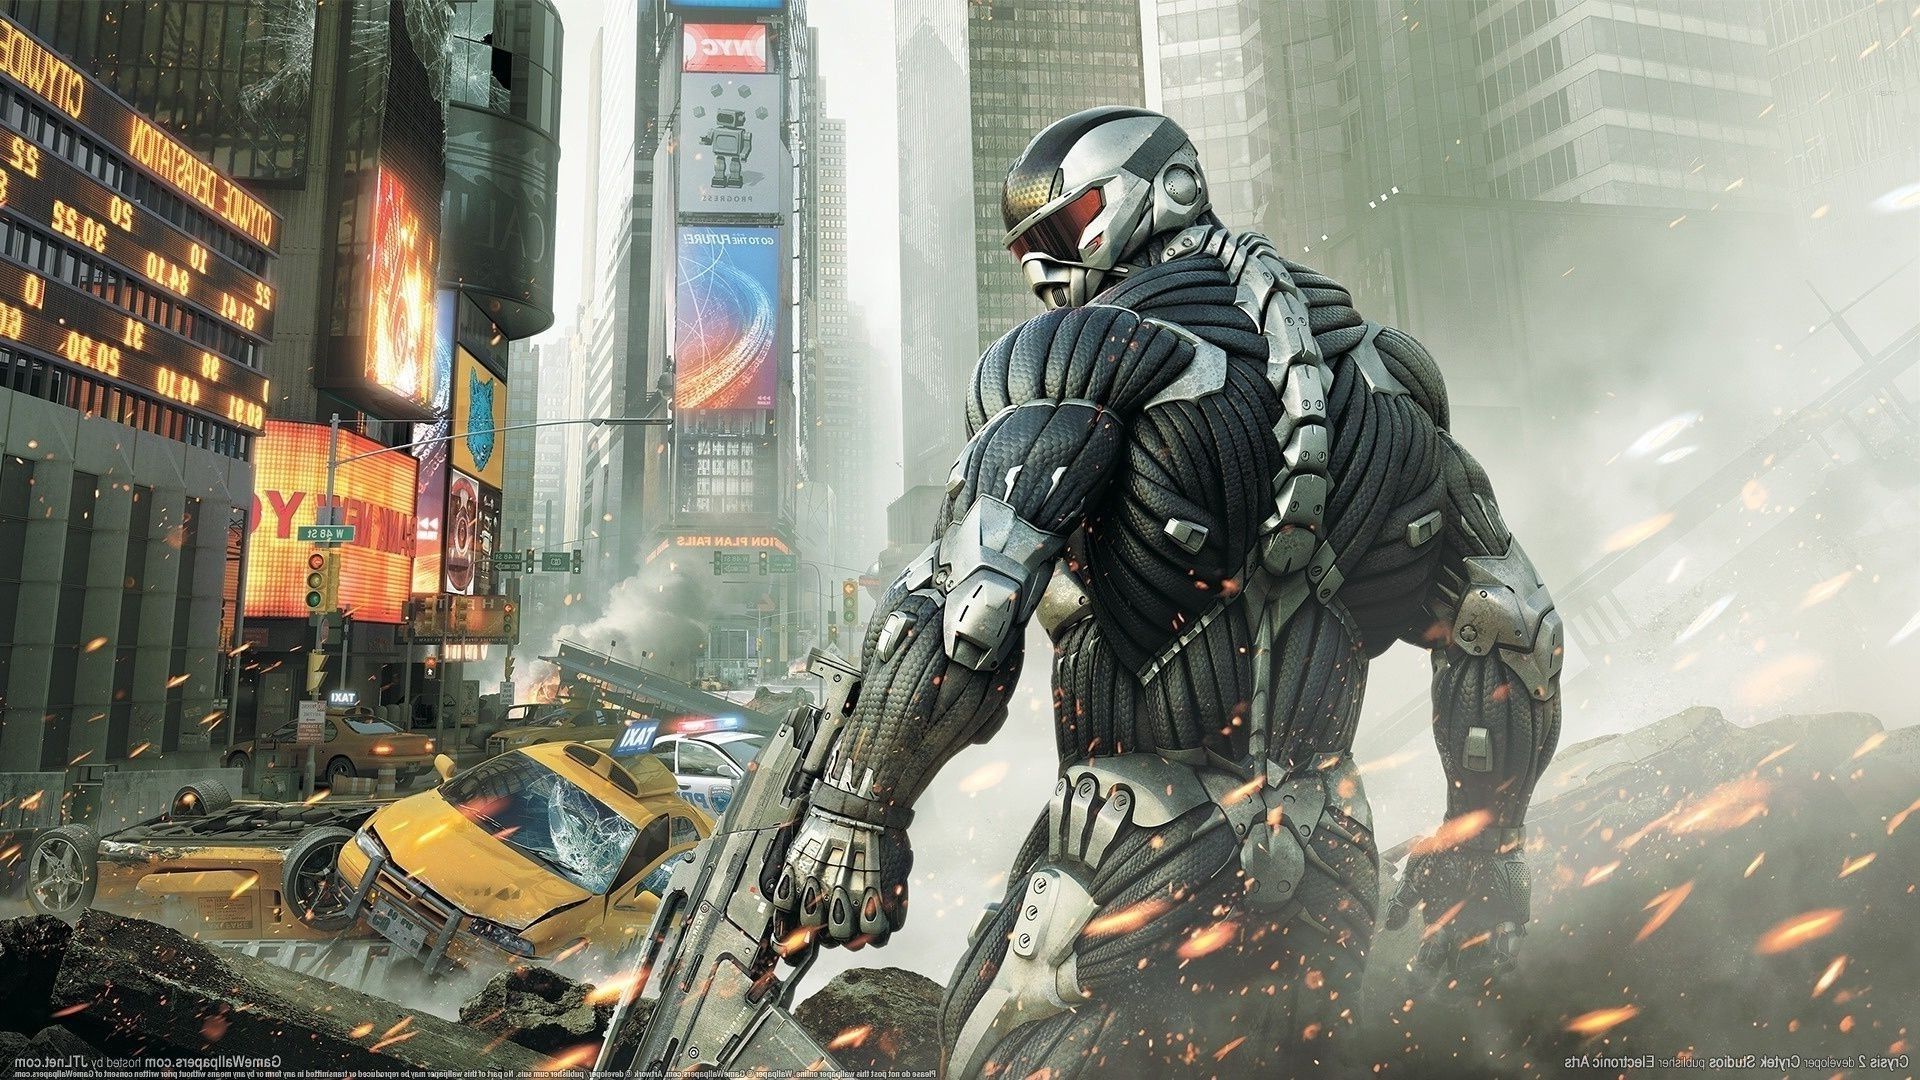 Pictures From The Game Crysis 2